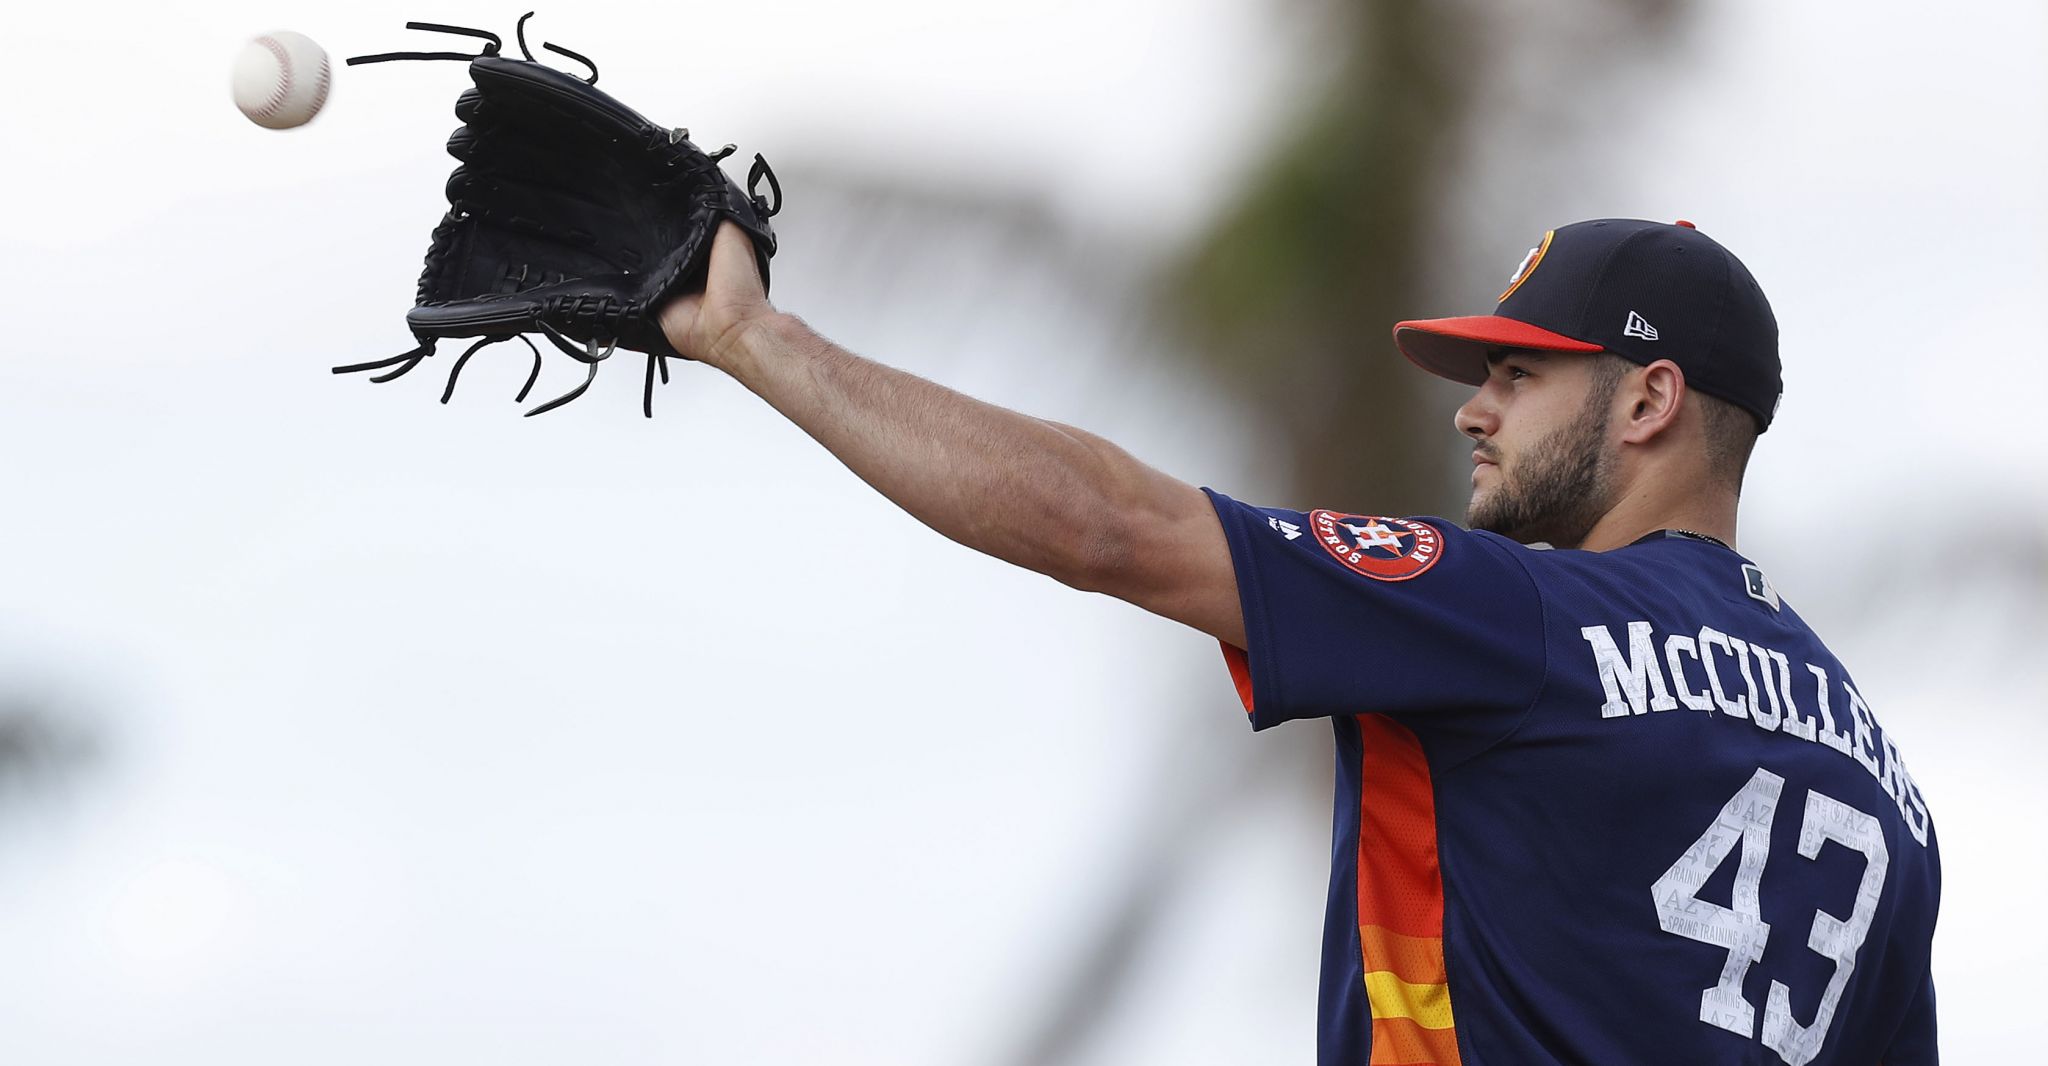 Astros Lance McCullers, Jr. won't be ready for opening day